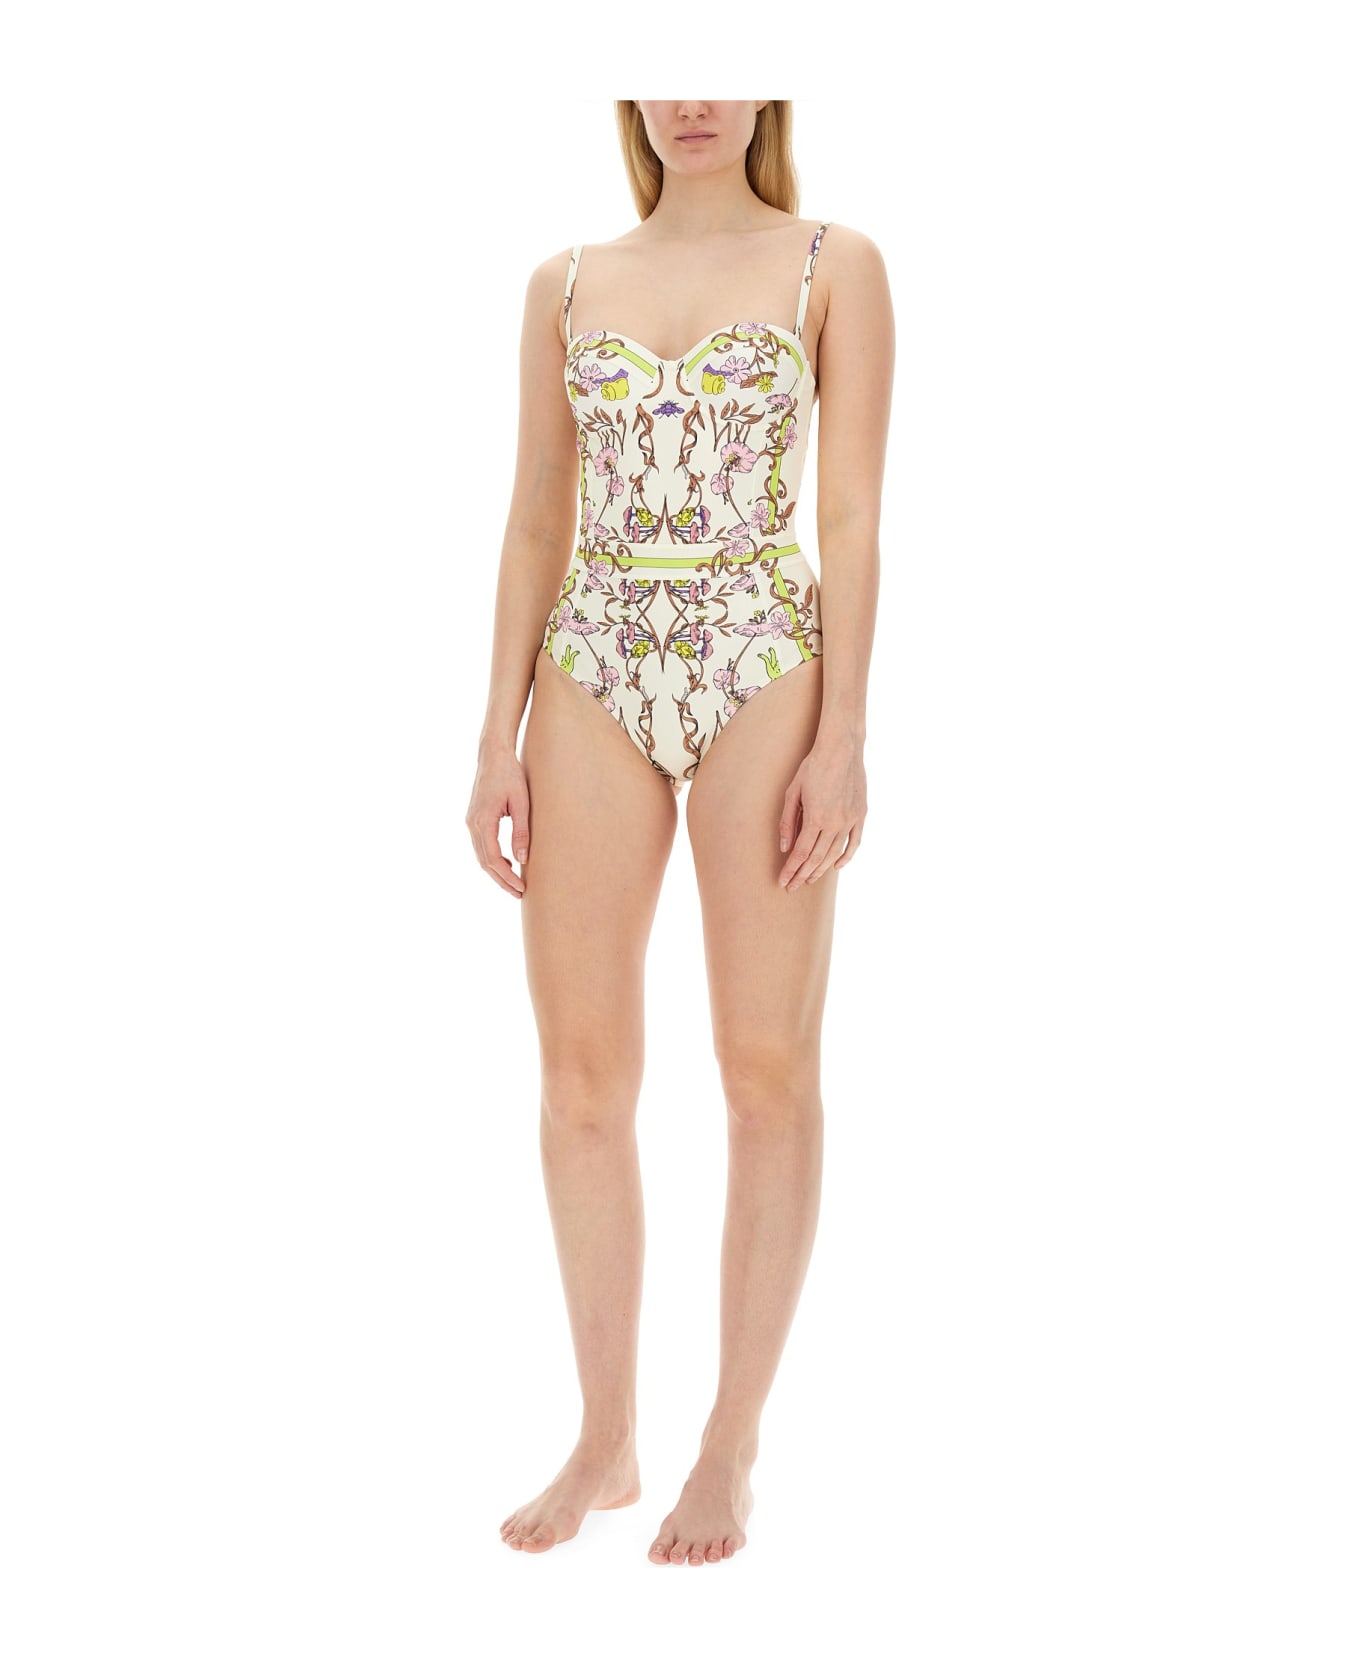 Tory Burch One Piece Swimsuit With Print - MULTICOLOR